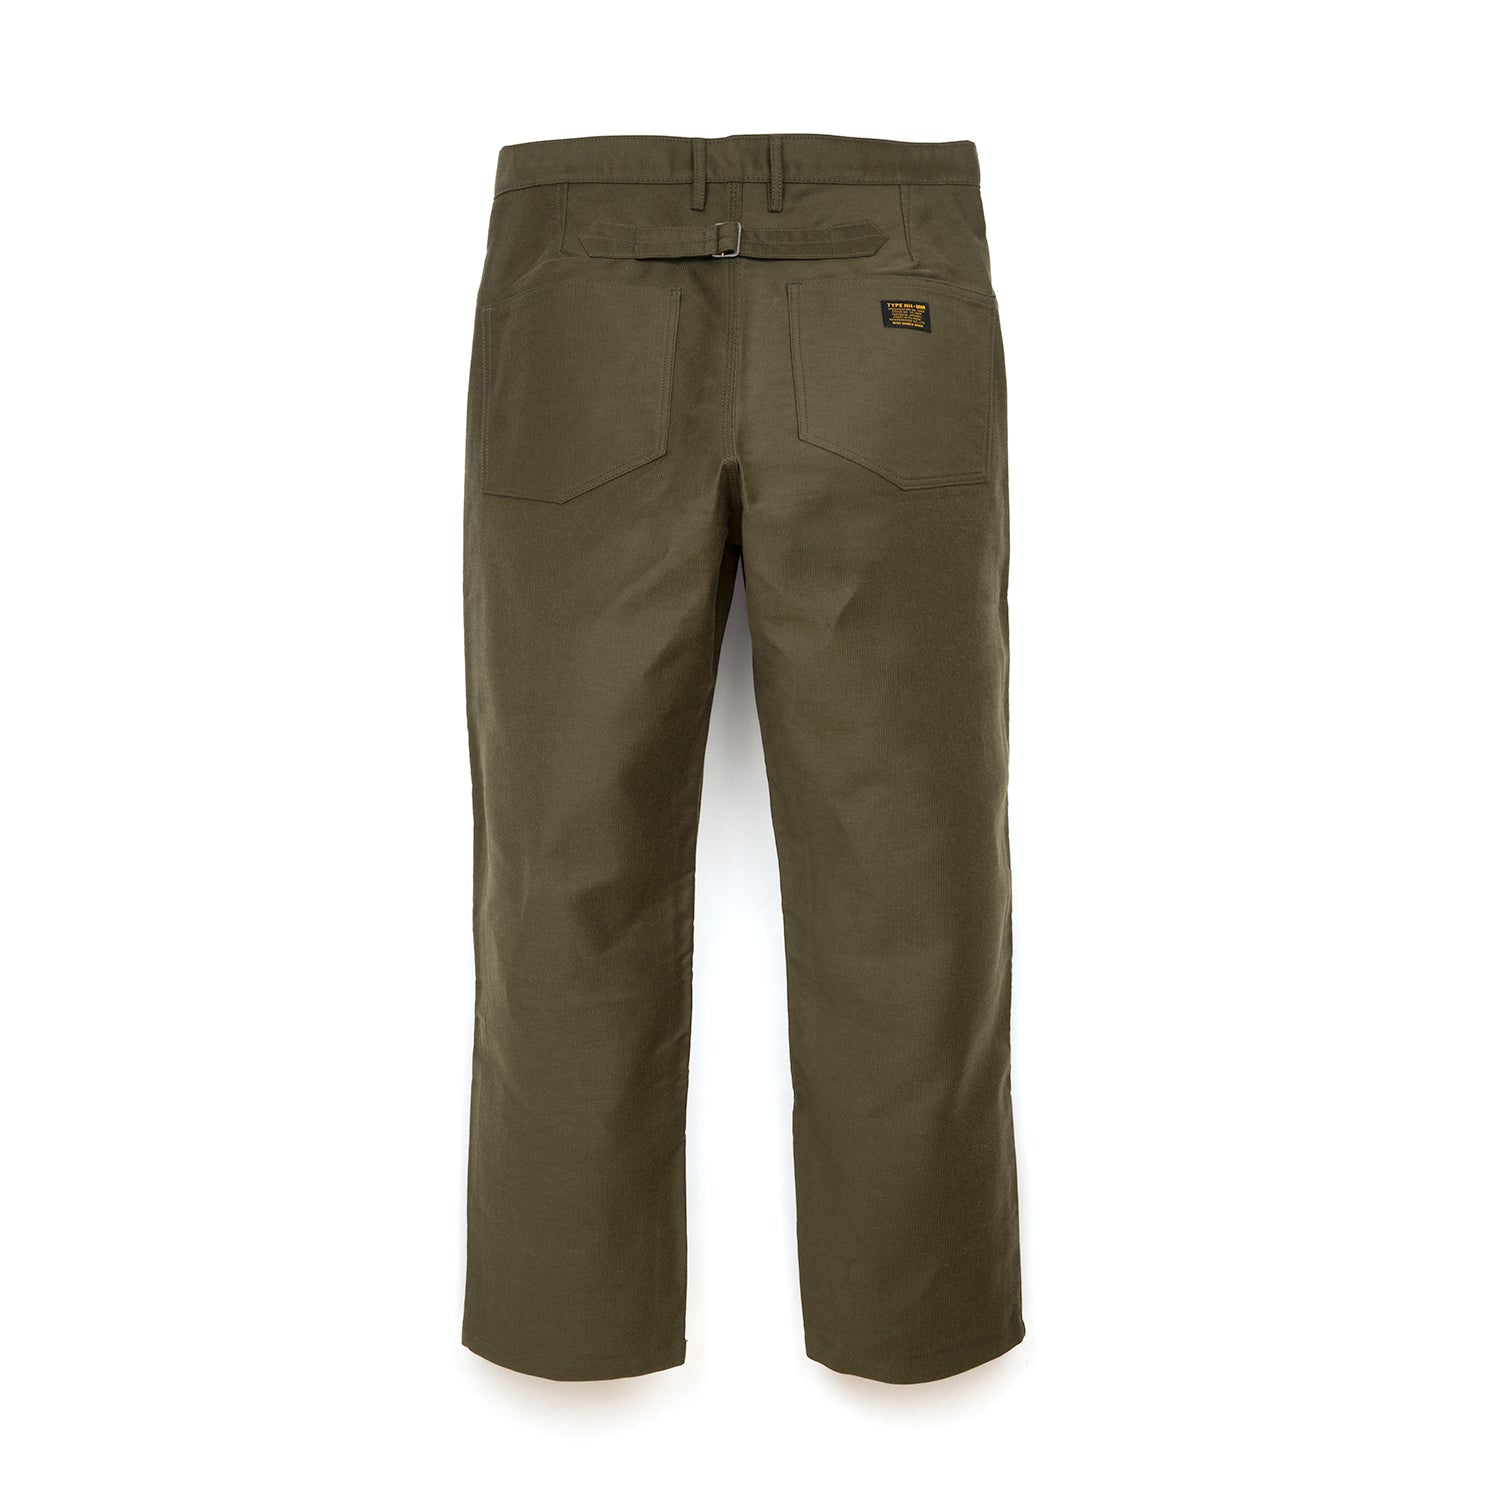 Canadian Style Olive Drab Combat Pant | Camouflage.ca